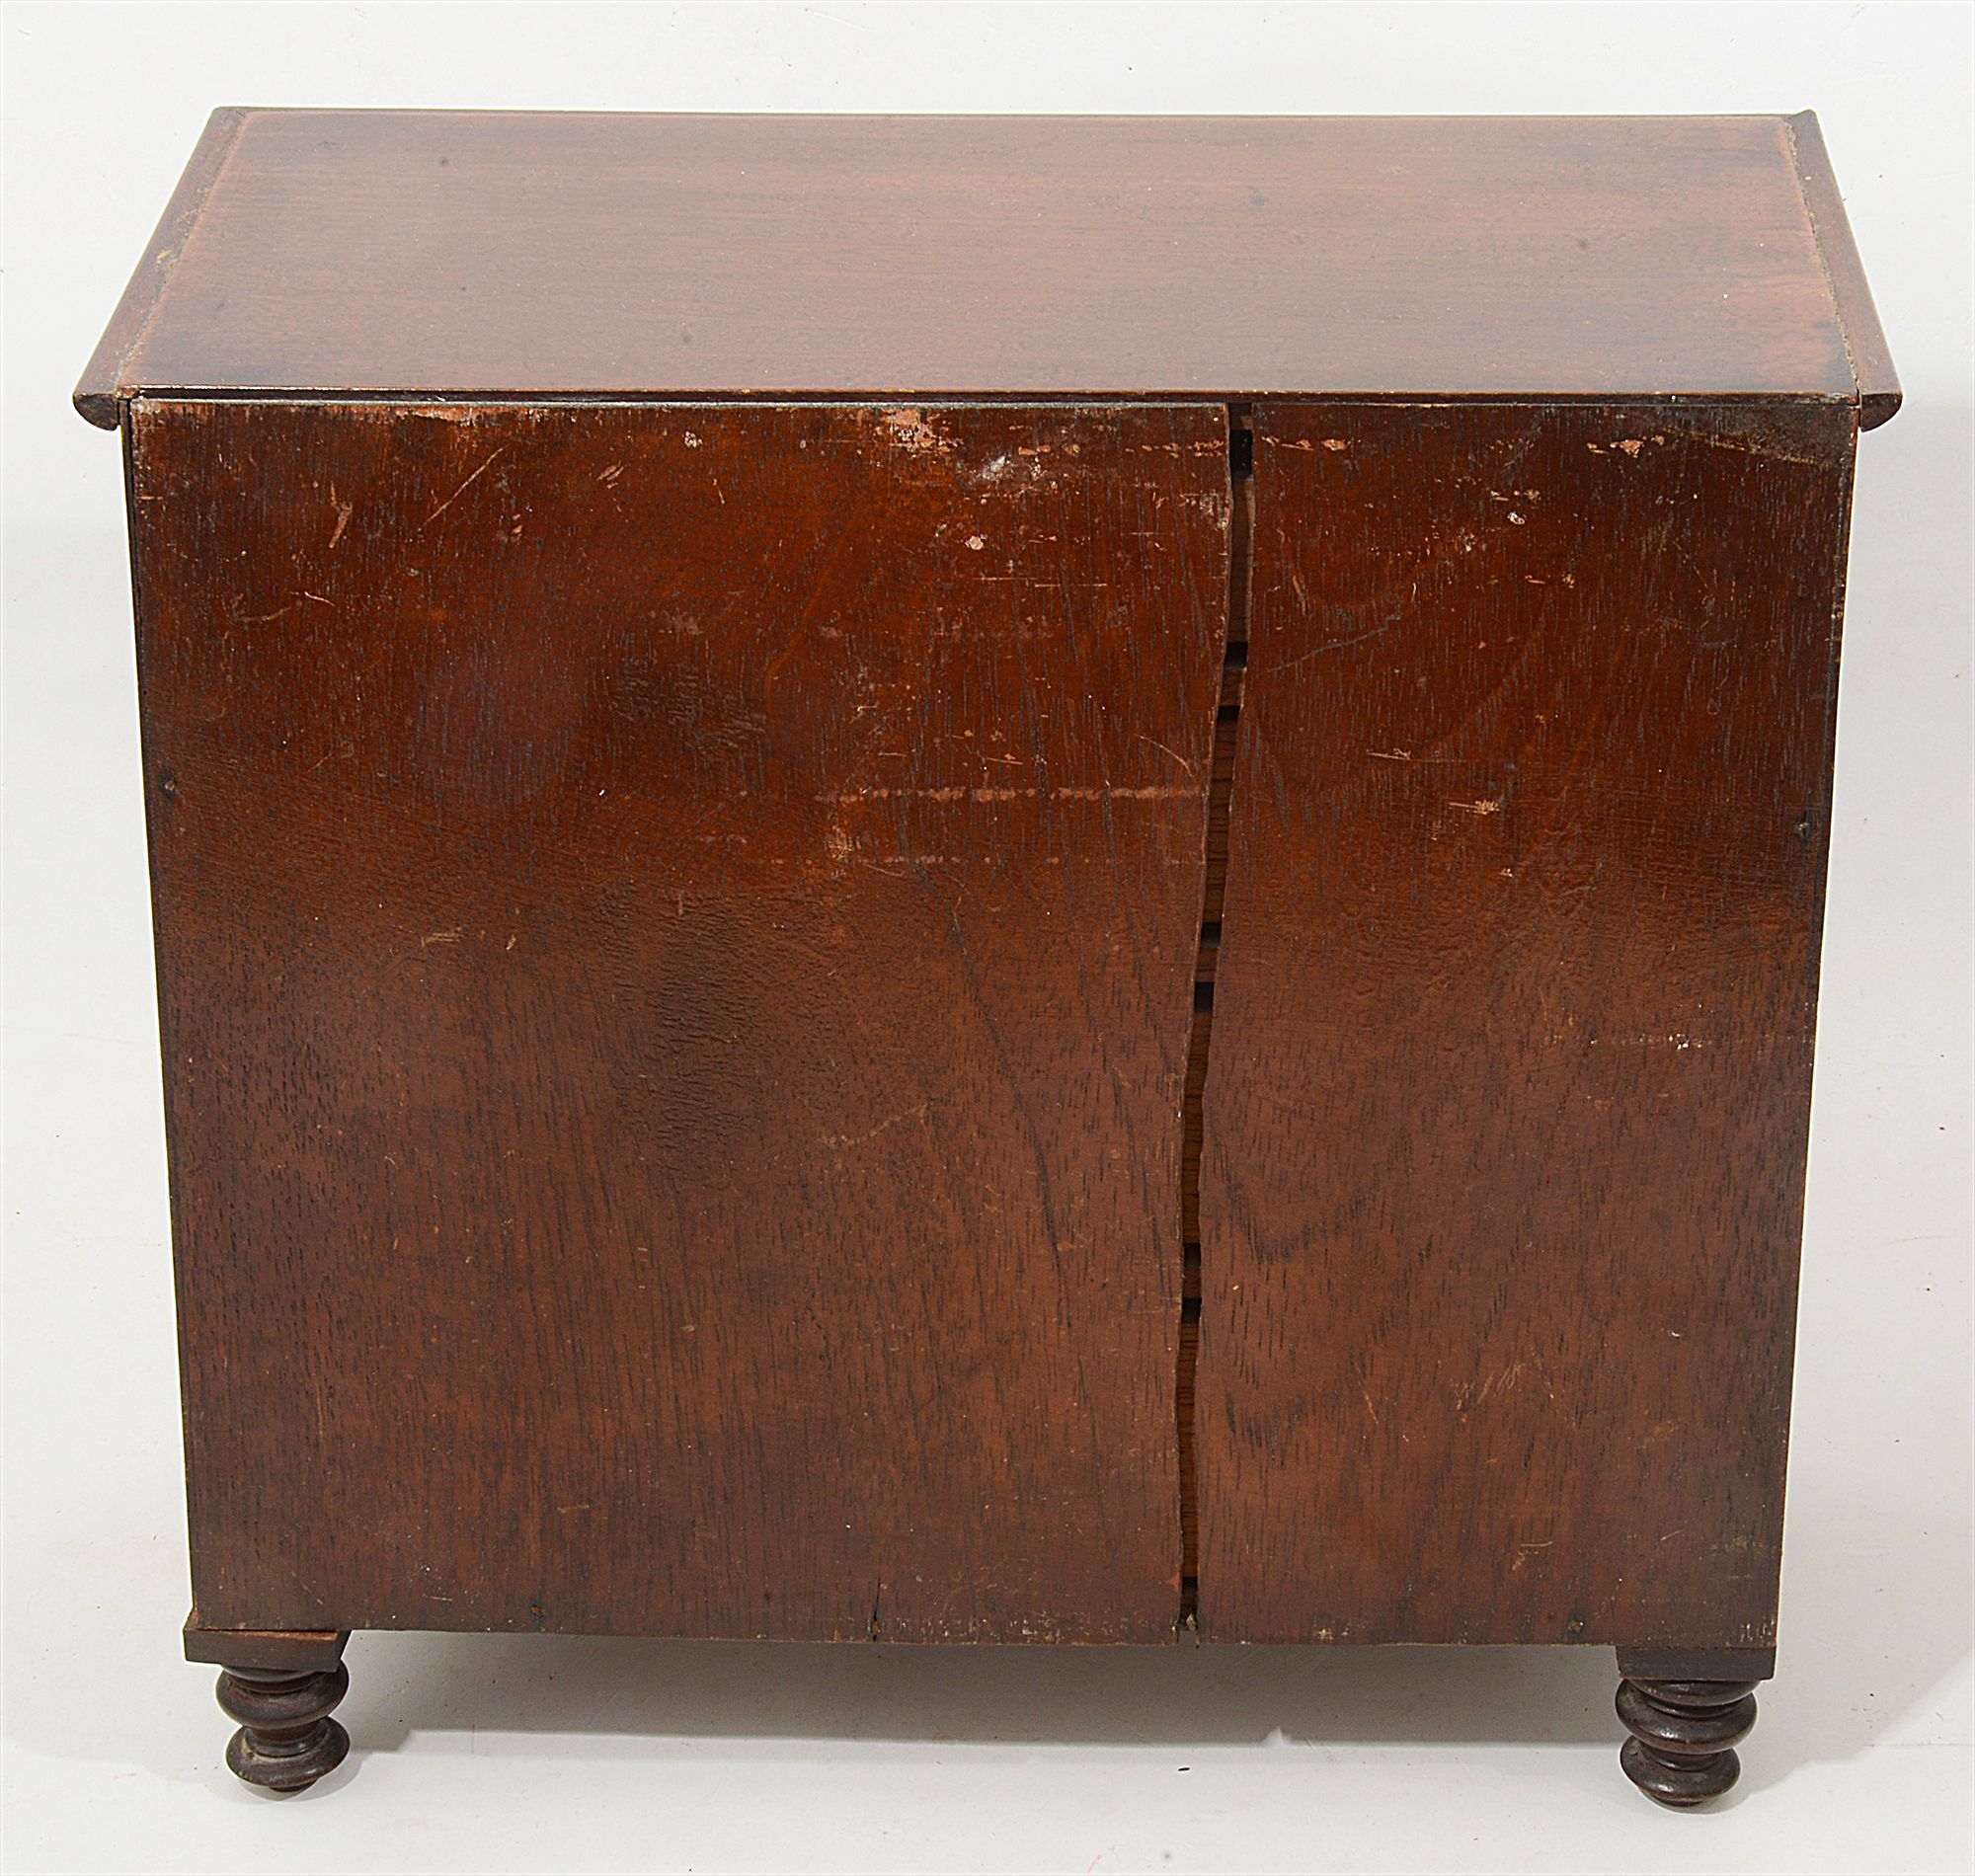 An early 19th century miniature mahogany chest of drawers - Image 2 of 2